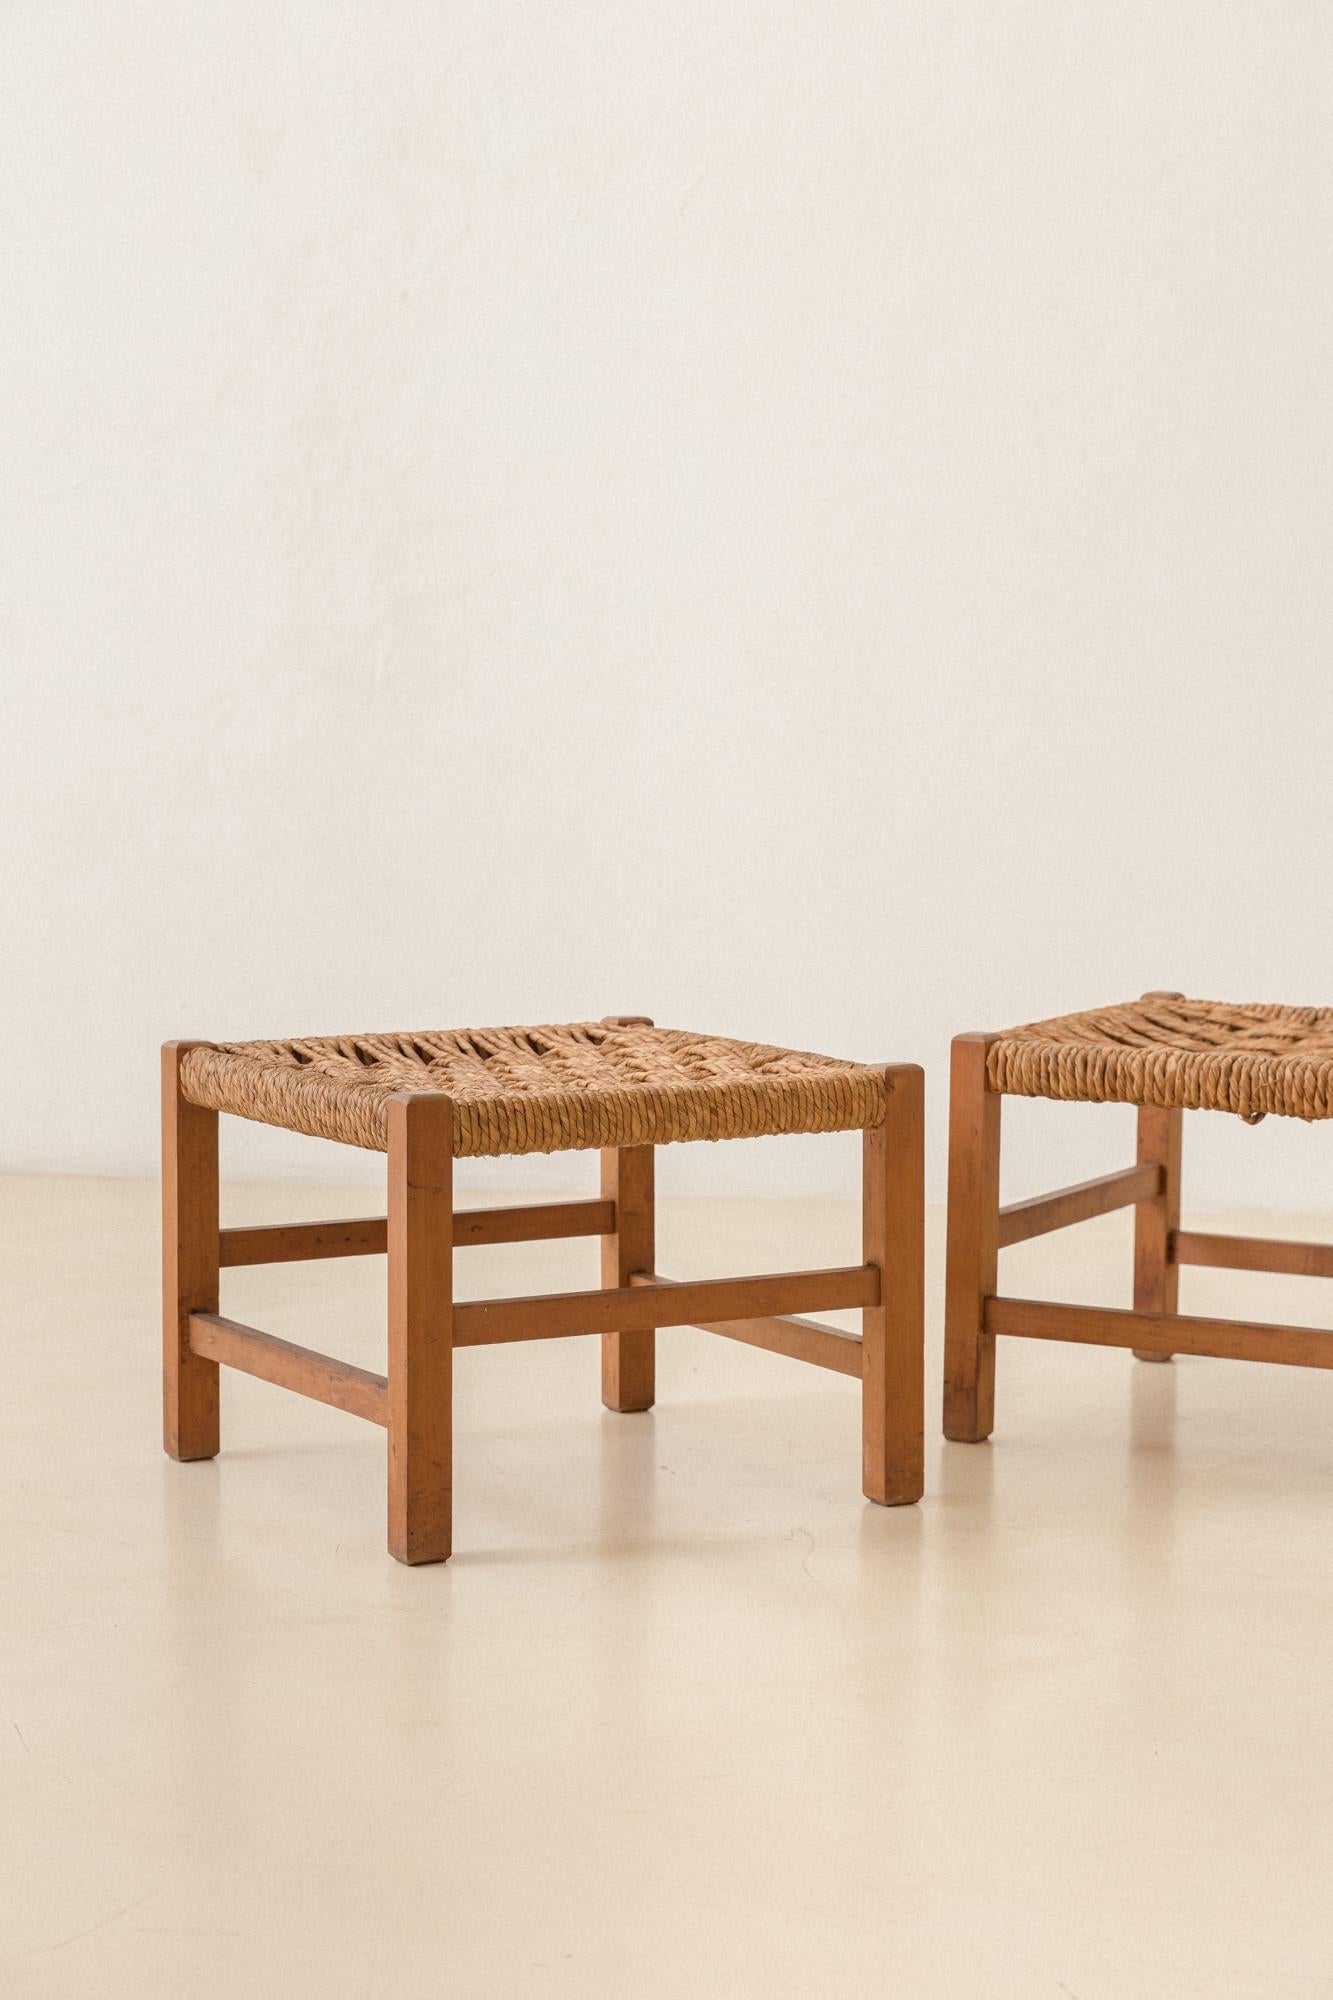 Mid-20th Century Pair of Brazilian Stools, Rosewood and Taboa Straw, Unknown Designer, 1960s For Sale